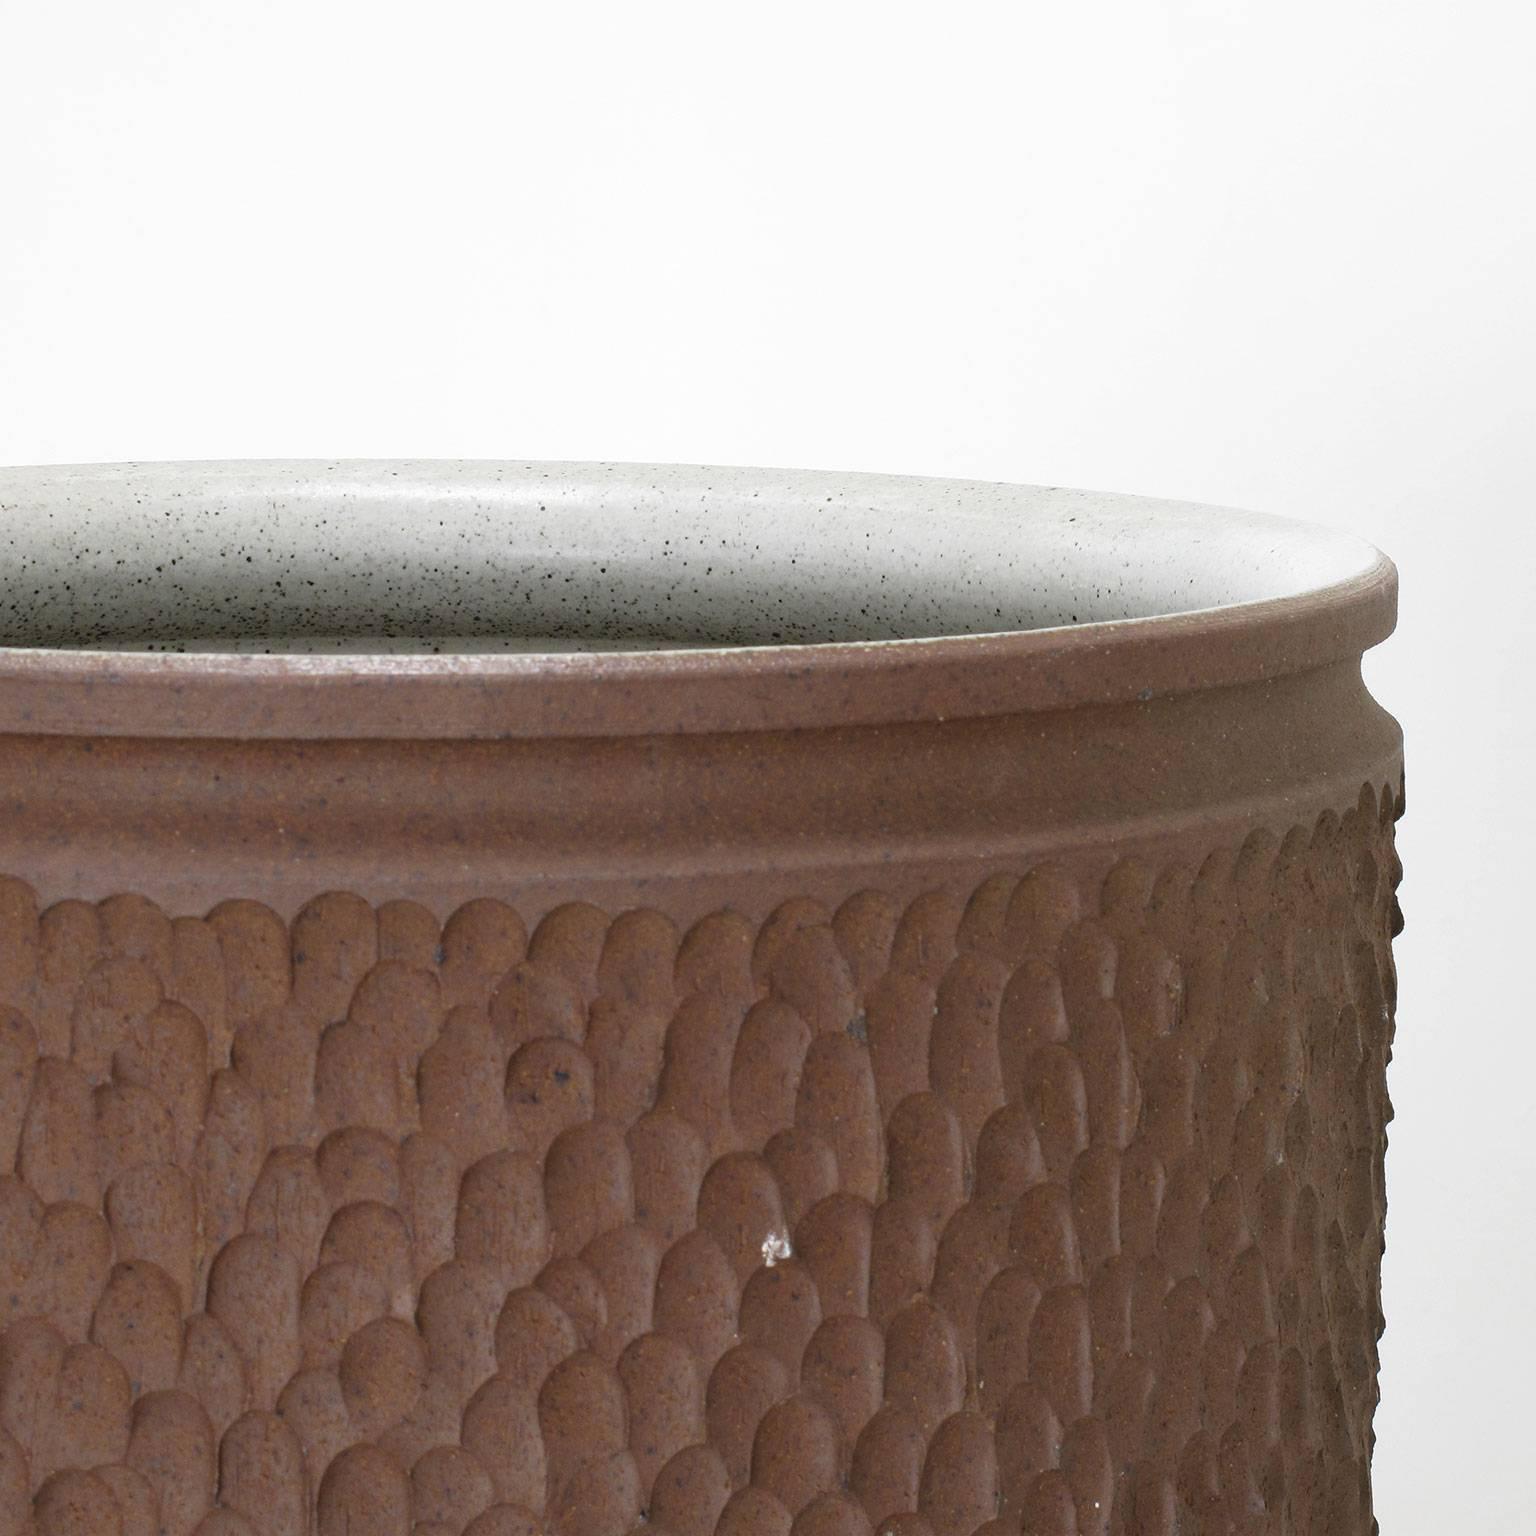 David Cressey and Robert Maxwell 'Pebble' Design Ceramic Planter, 1970s In Good Condition For Sale In Los Angeles, CA